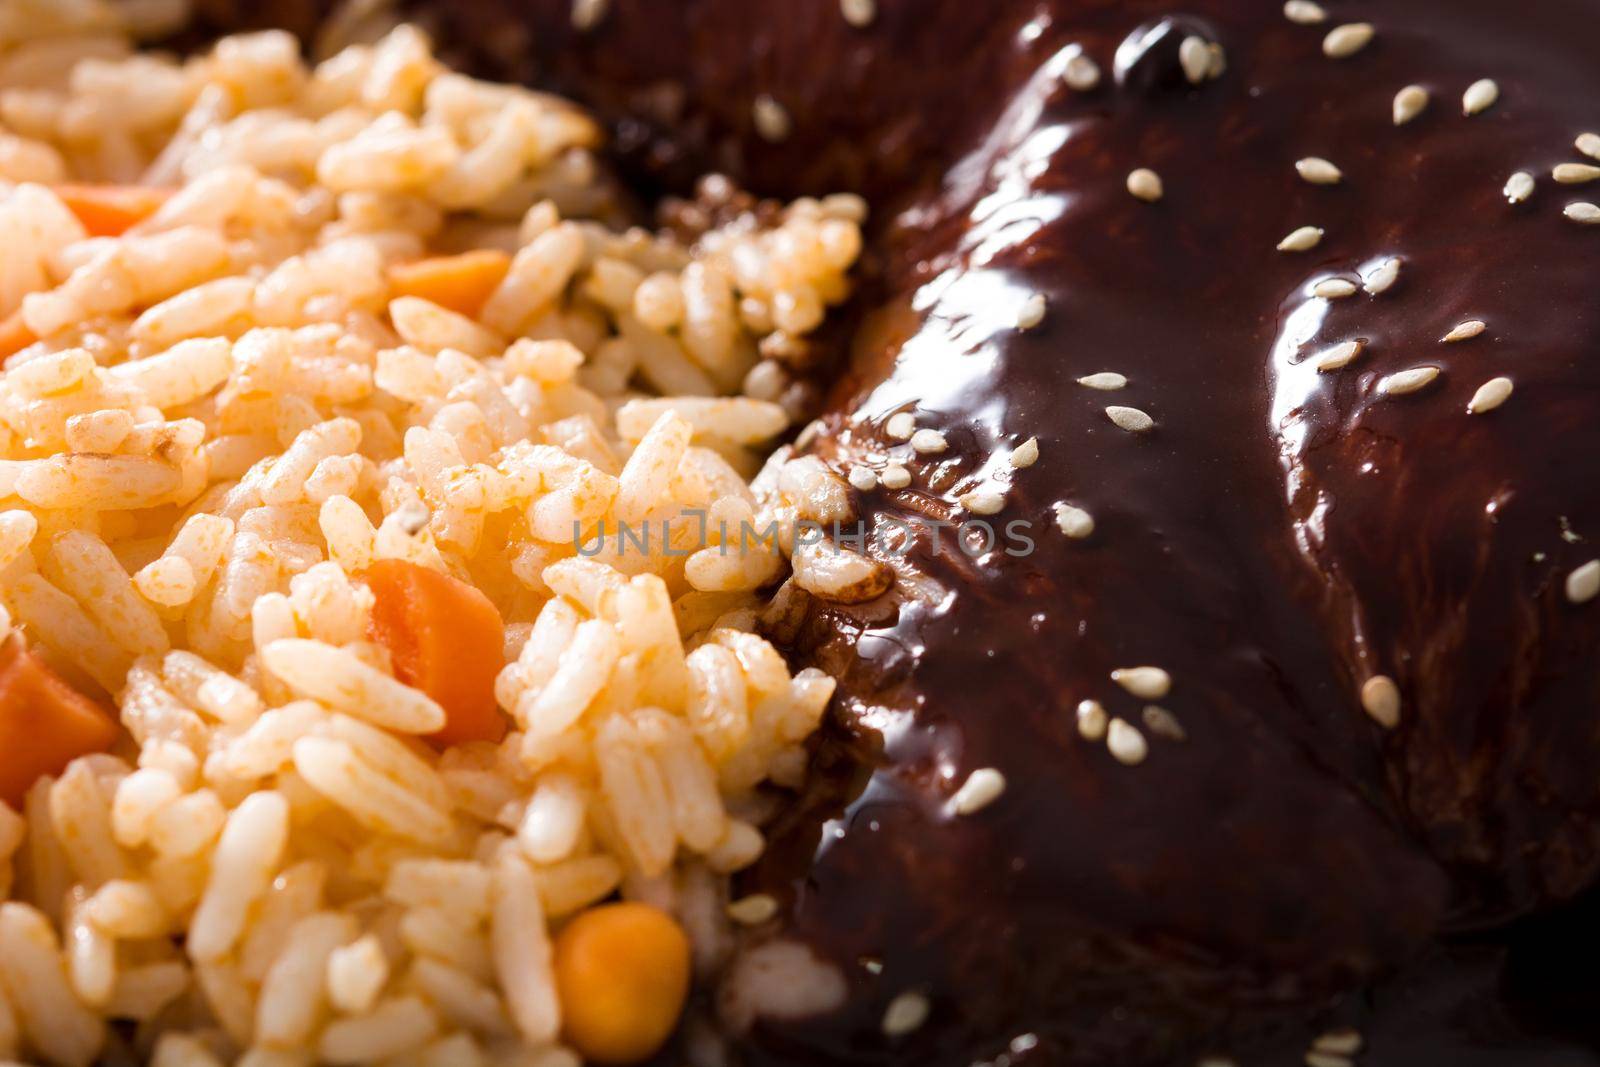 Traditional mole Poblano with rice by chandlervid85